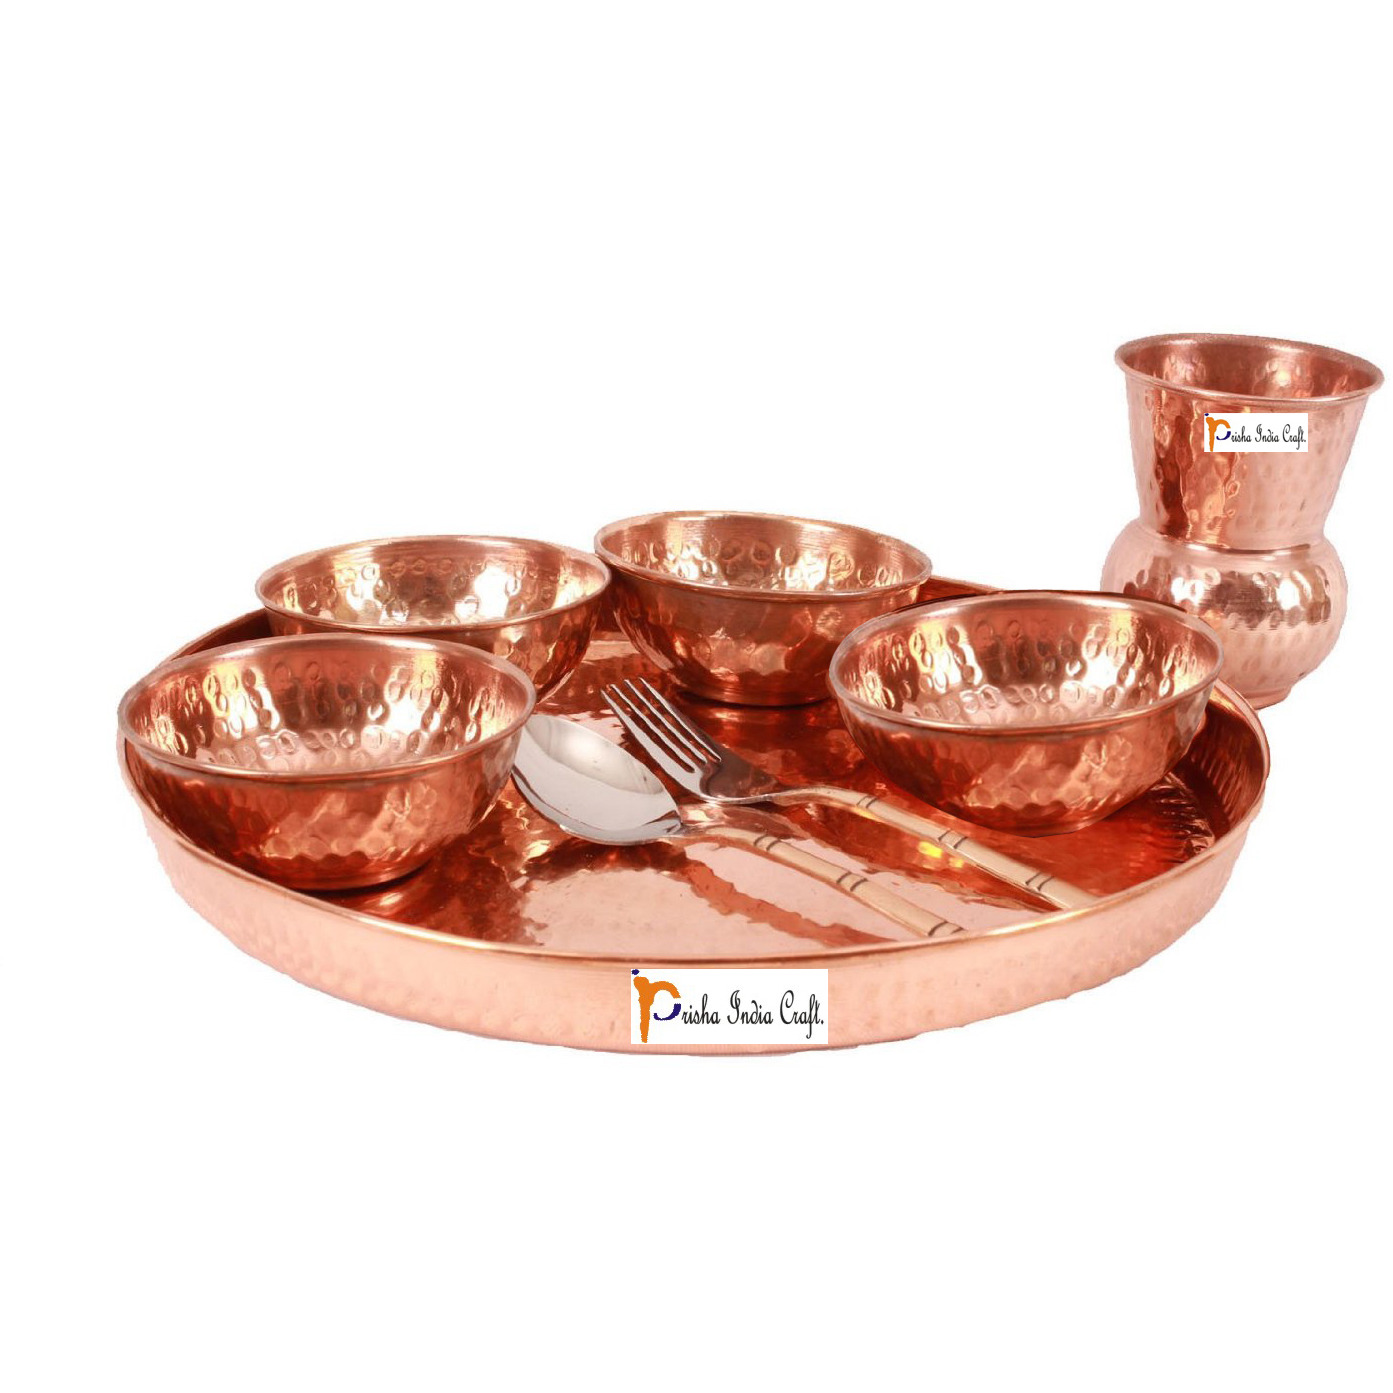 Prisha India Craft B. Set of 5 Dinnerware Traditional 100% Pure Copper Dinner Set of Thali Plate, Bowls, Glass and Spoon, Dia 12  With 1 Pure Copper Pitcher Jug - Christmas Gift